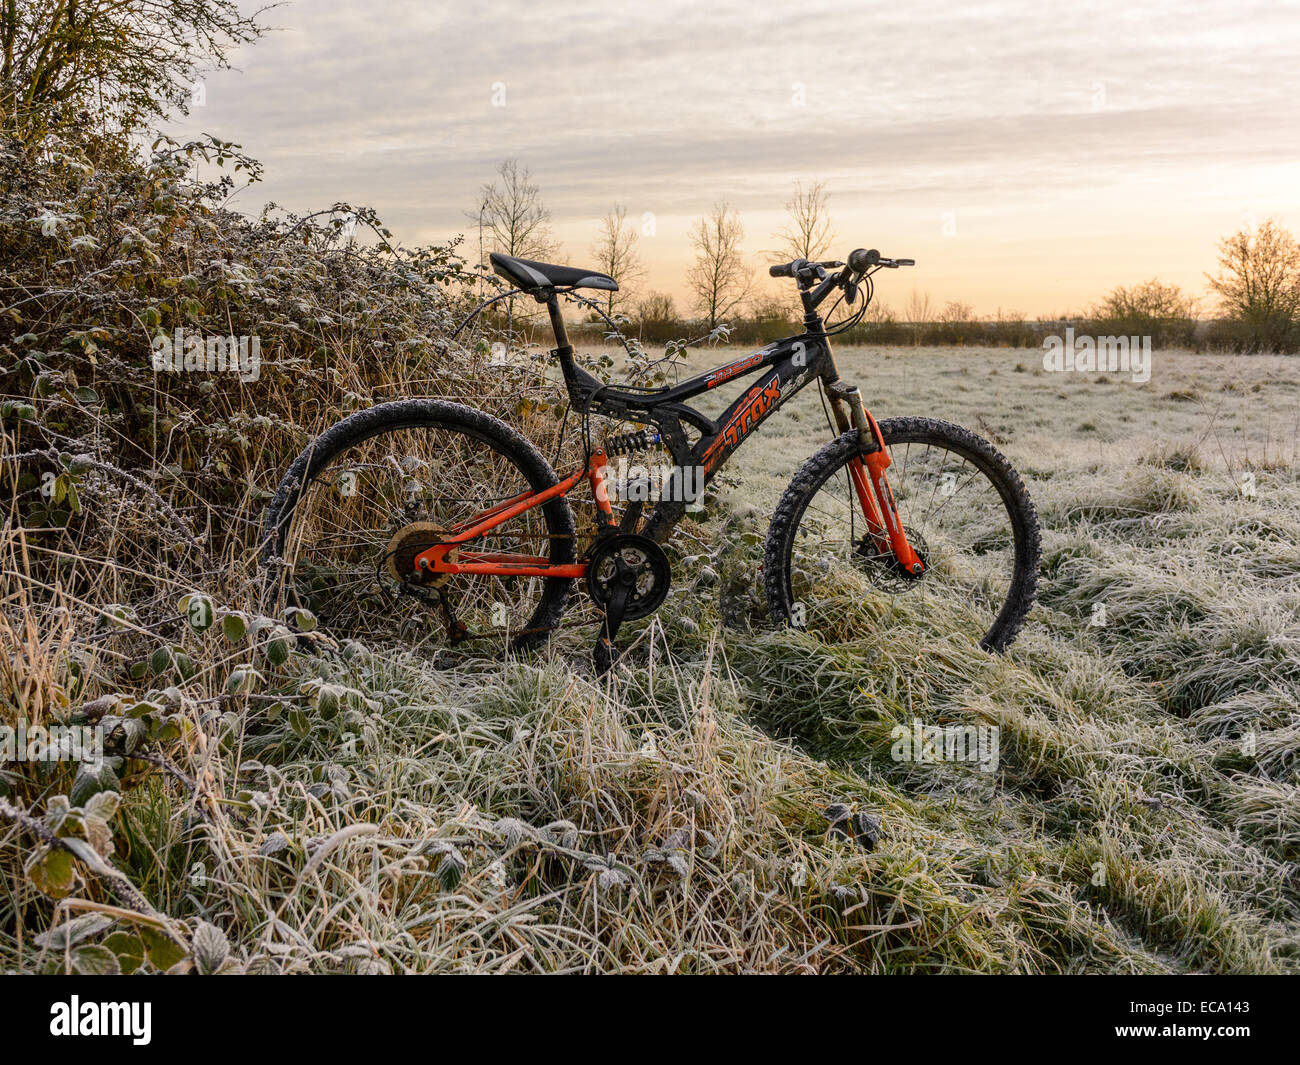 Countryside scene depicting black and orange mountain bike standing upright amongst gorse brambles covered in morning frost. Stock Photo